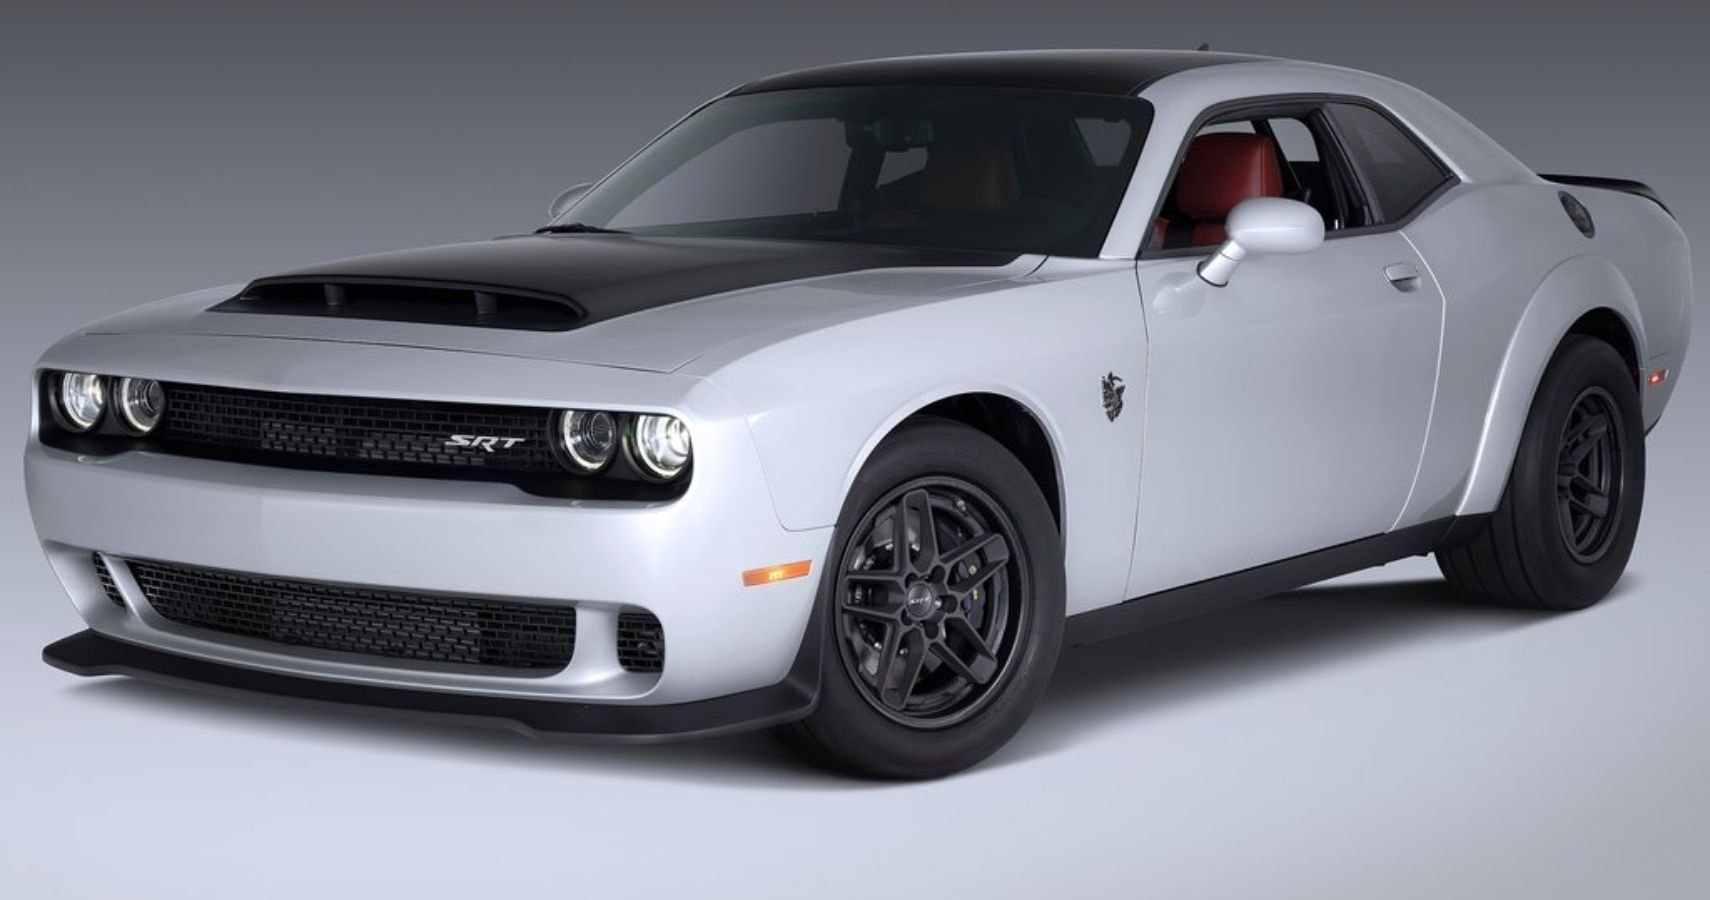 10 Things We Love And Hate About The 2023 Dodge Challenger SRT Demon 170